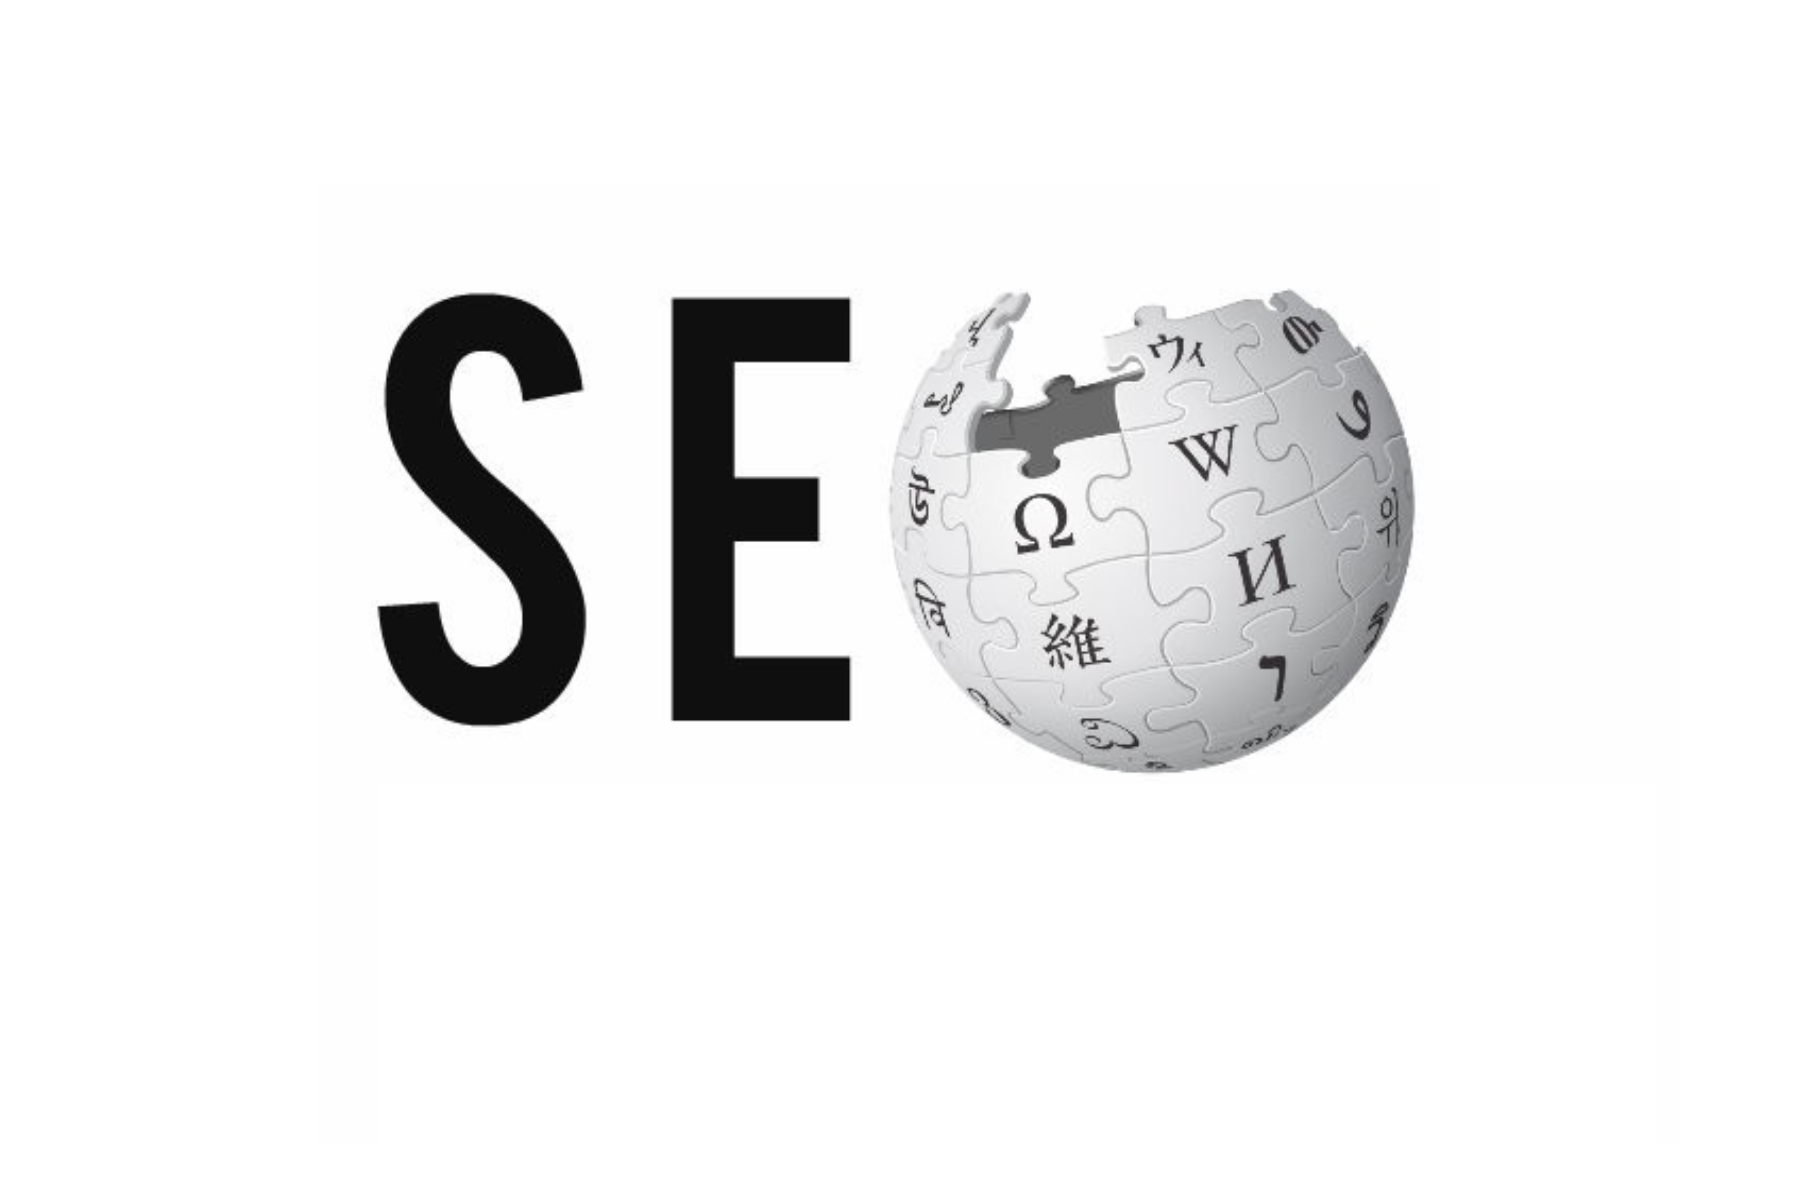 The term "SEO" with the Wikipedia logo